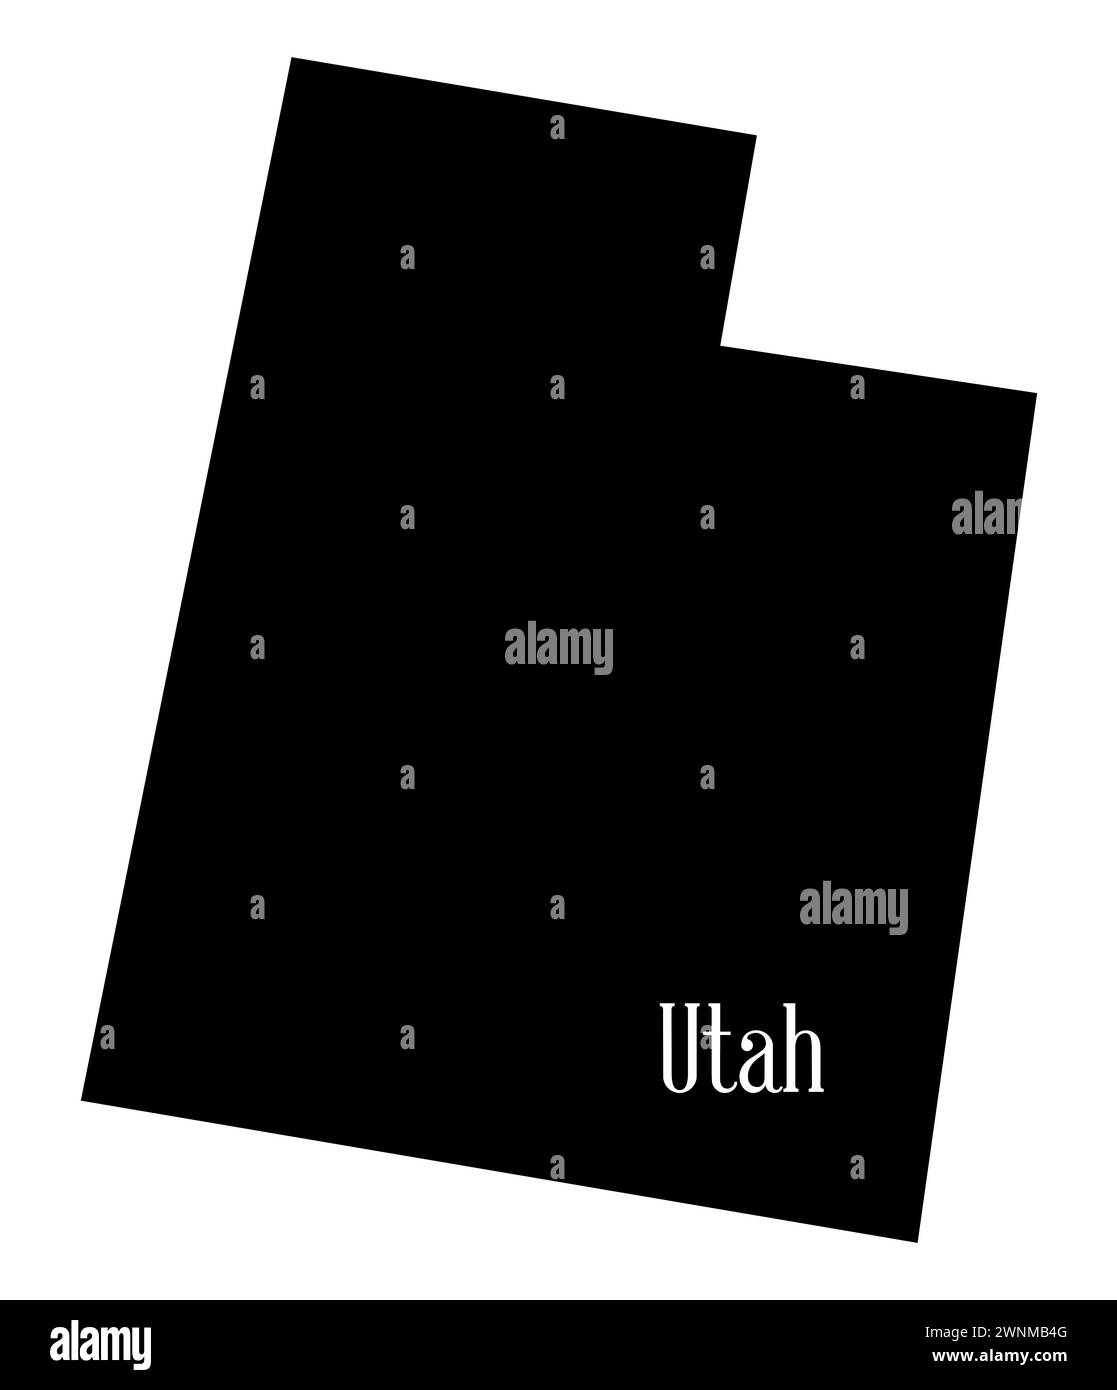 Outline silhouette map of the state of Utah on a white background Stock Photo